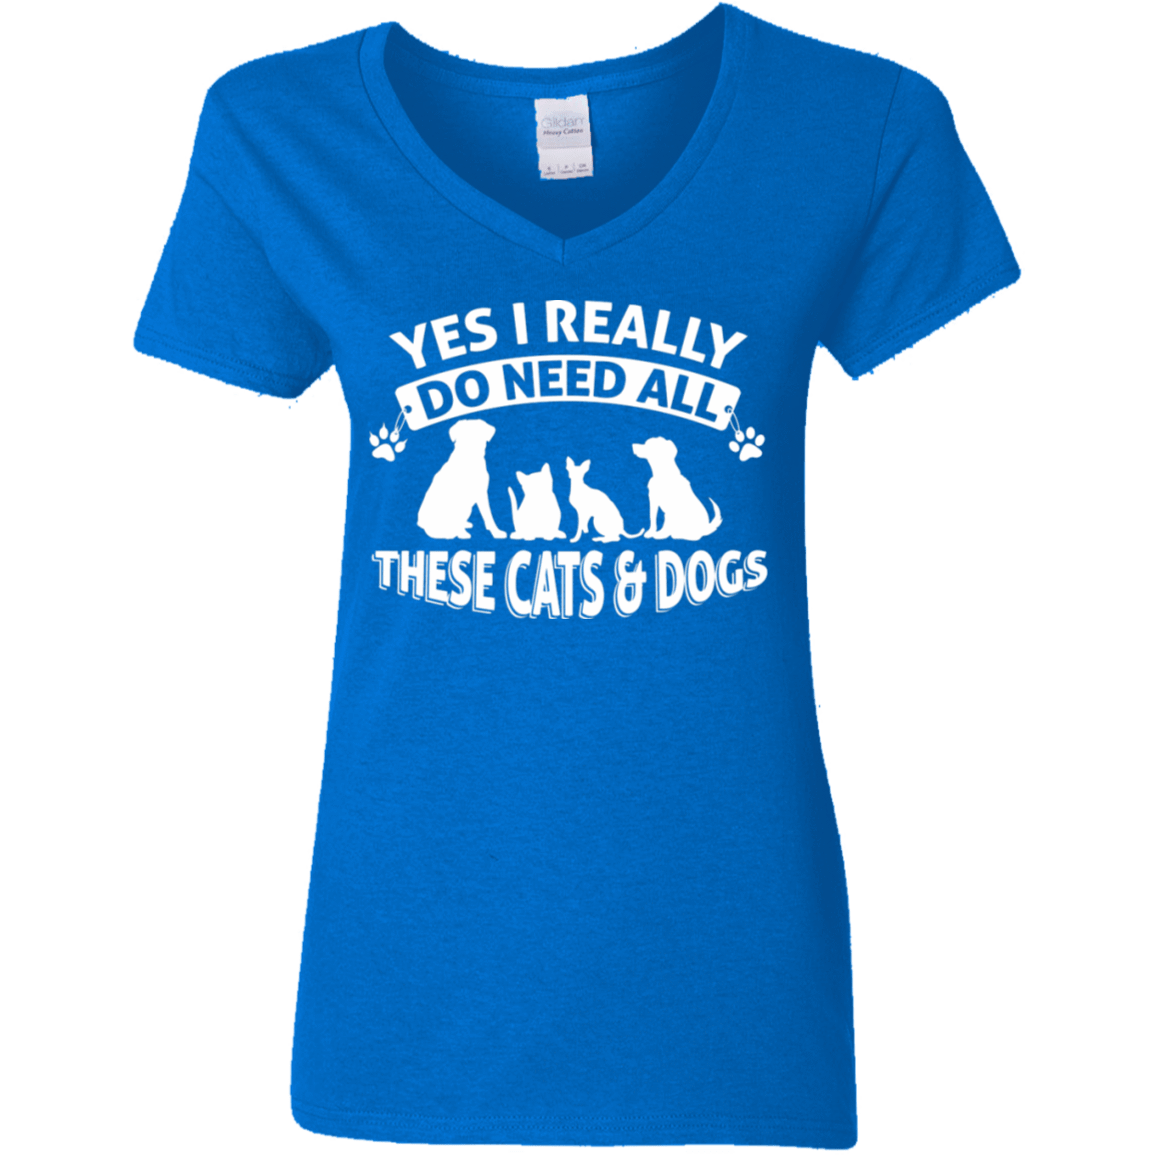 All These Cats And Dogs - Ladies V Neck.